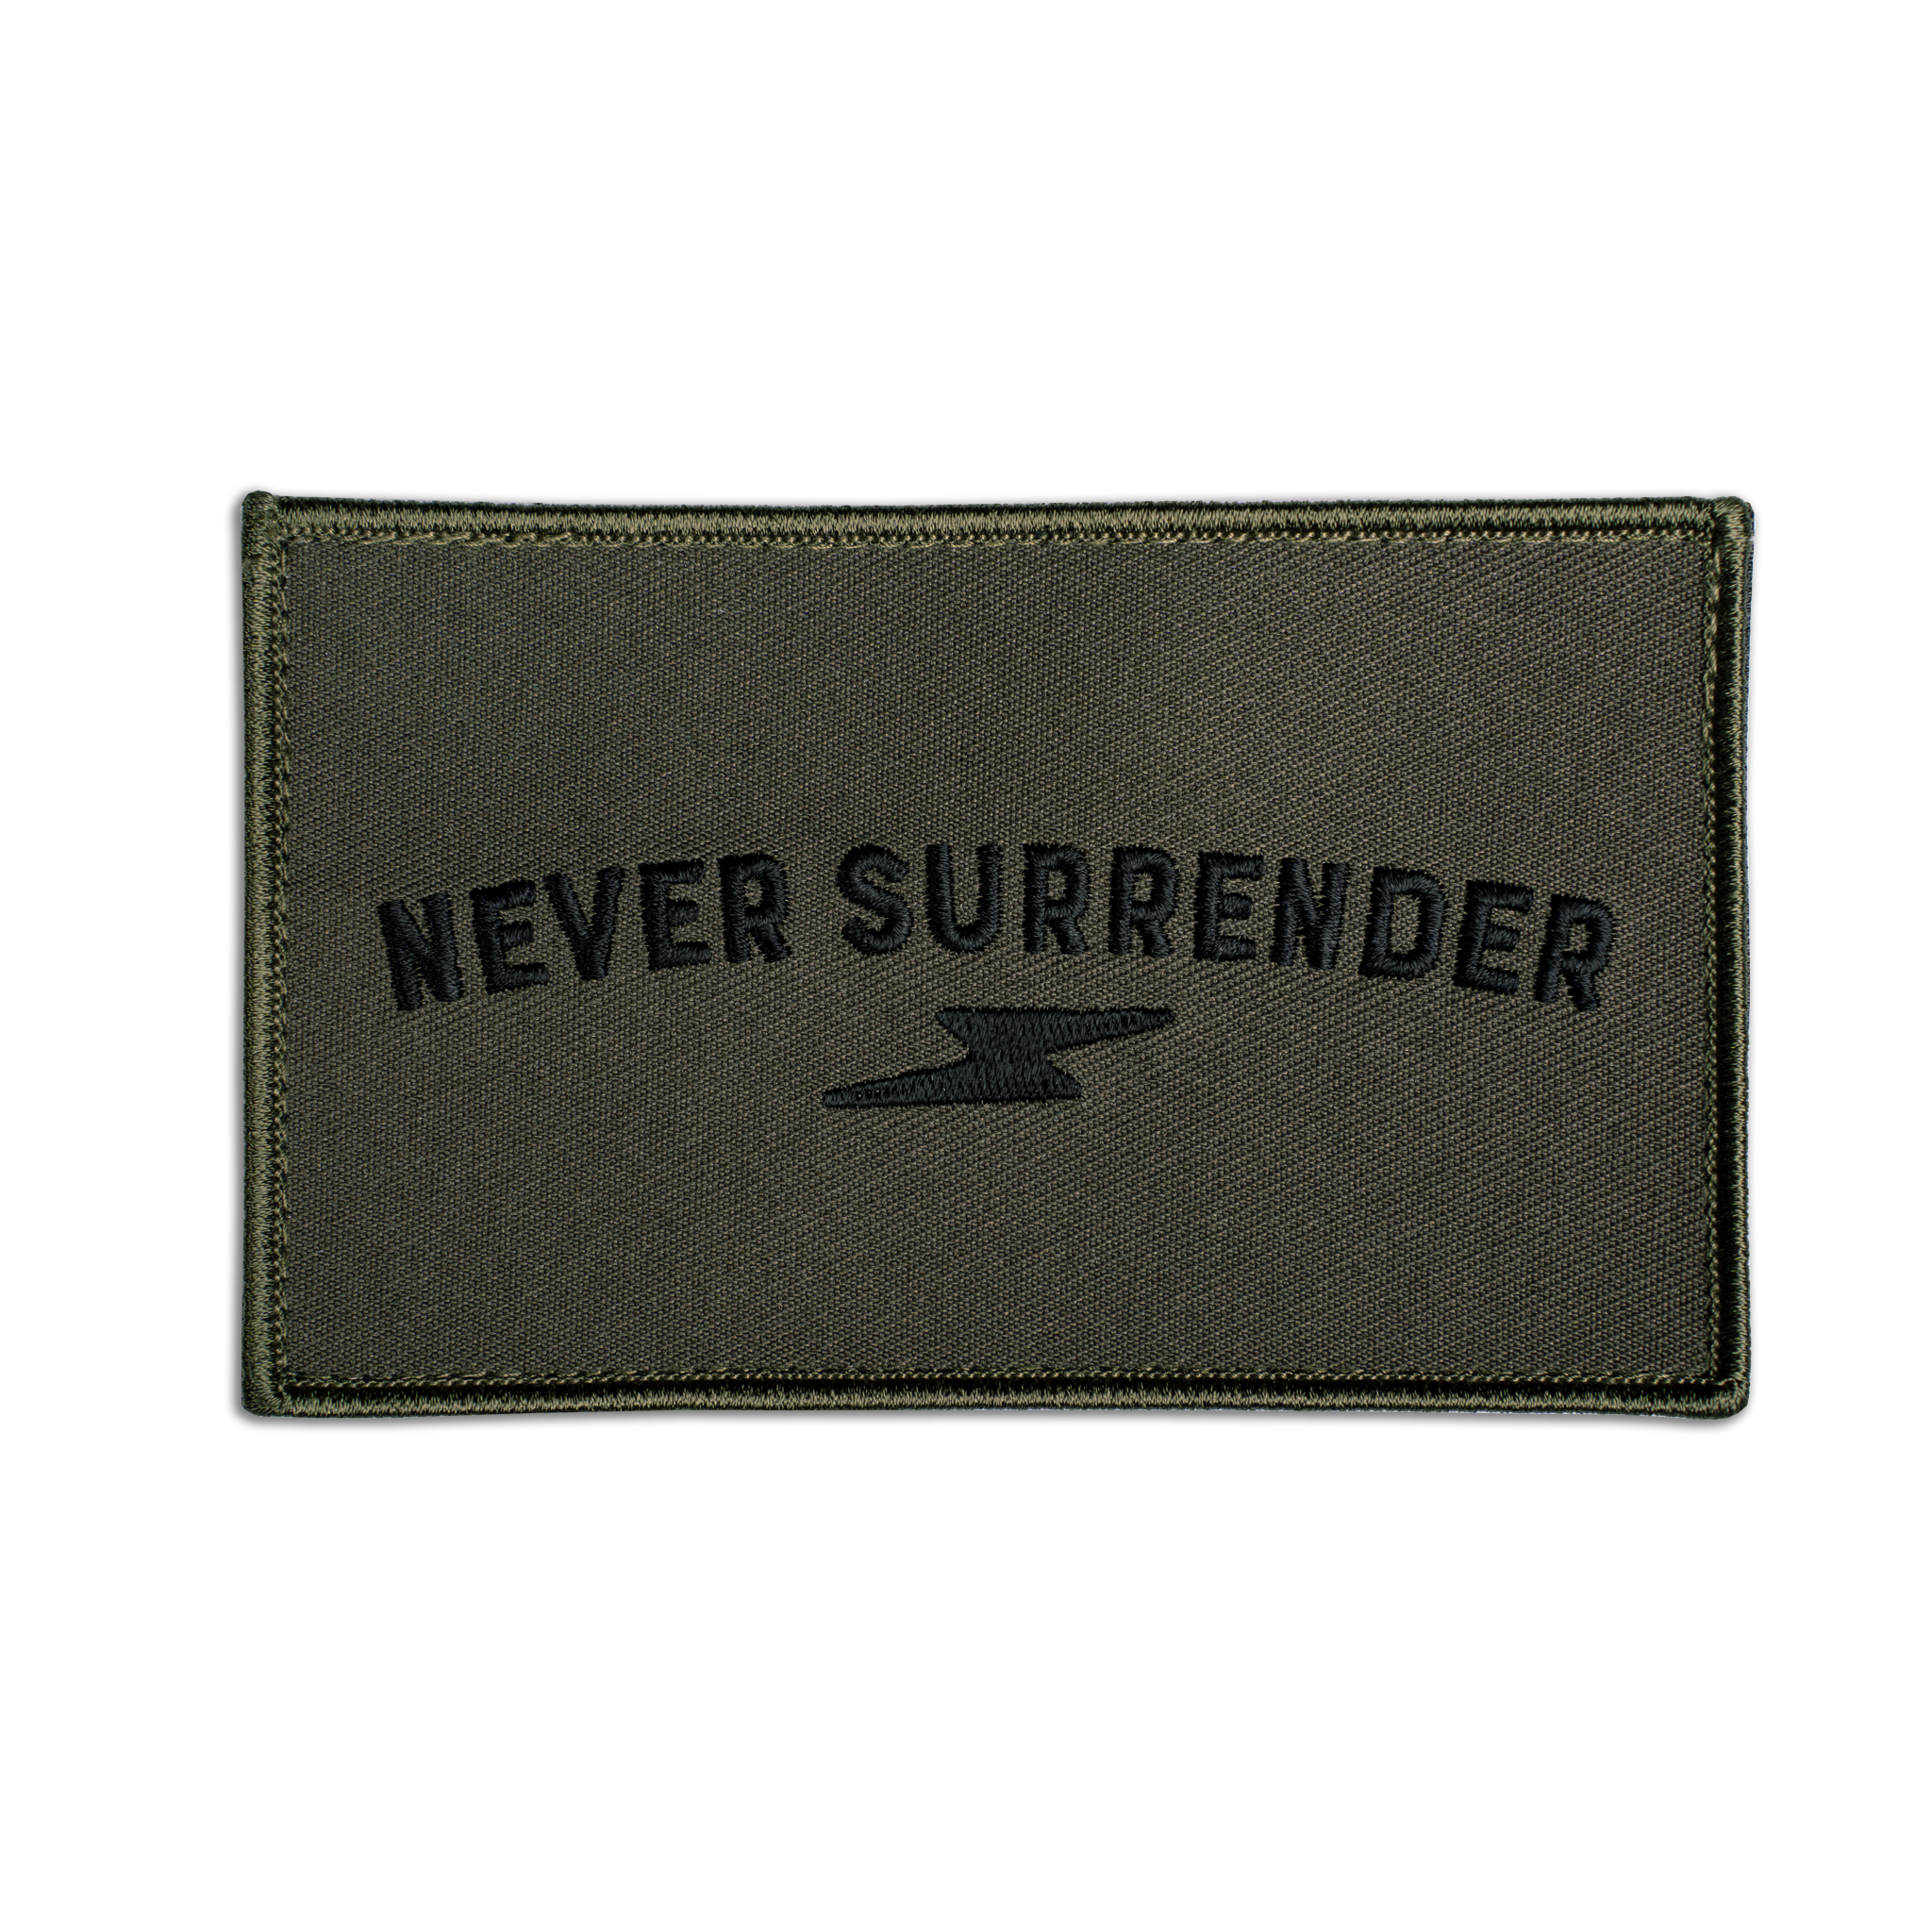 Never Surrender - Green Patch